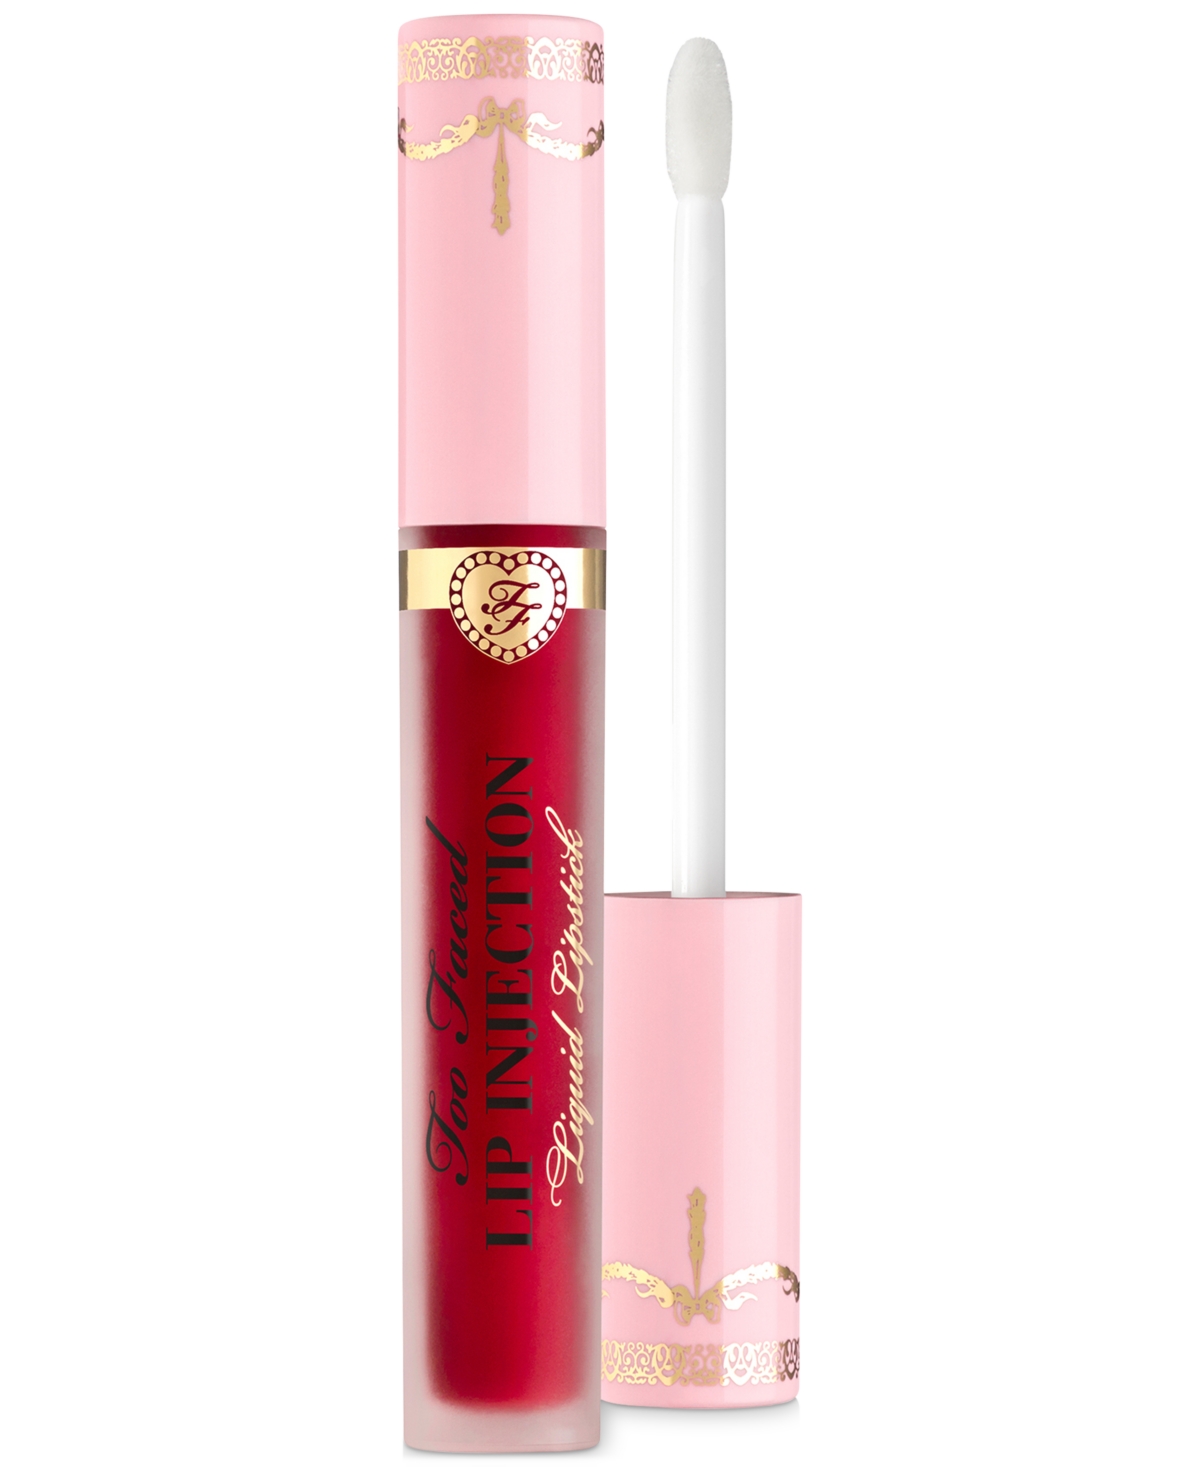 Too Faced Lip Injection Longwear Power Plumping Cream Liquid Lipstick In Infatuated (vivid Warm Red)